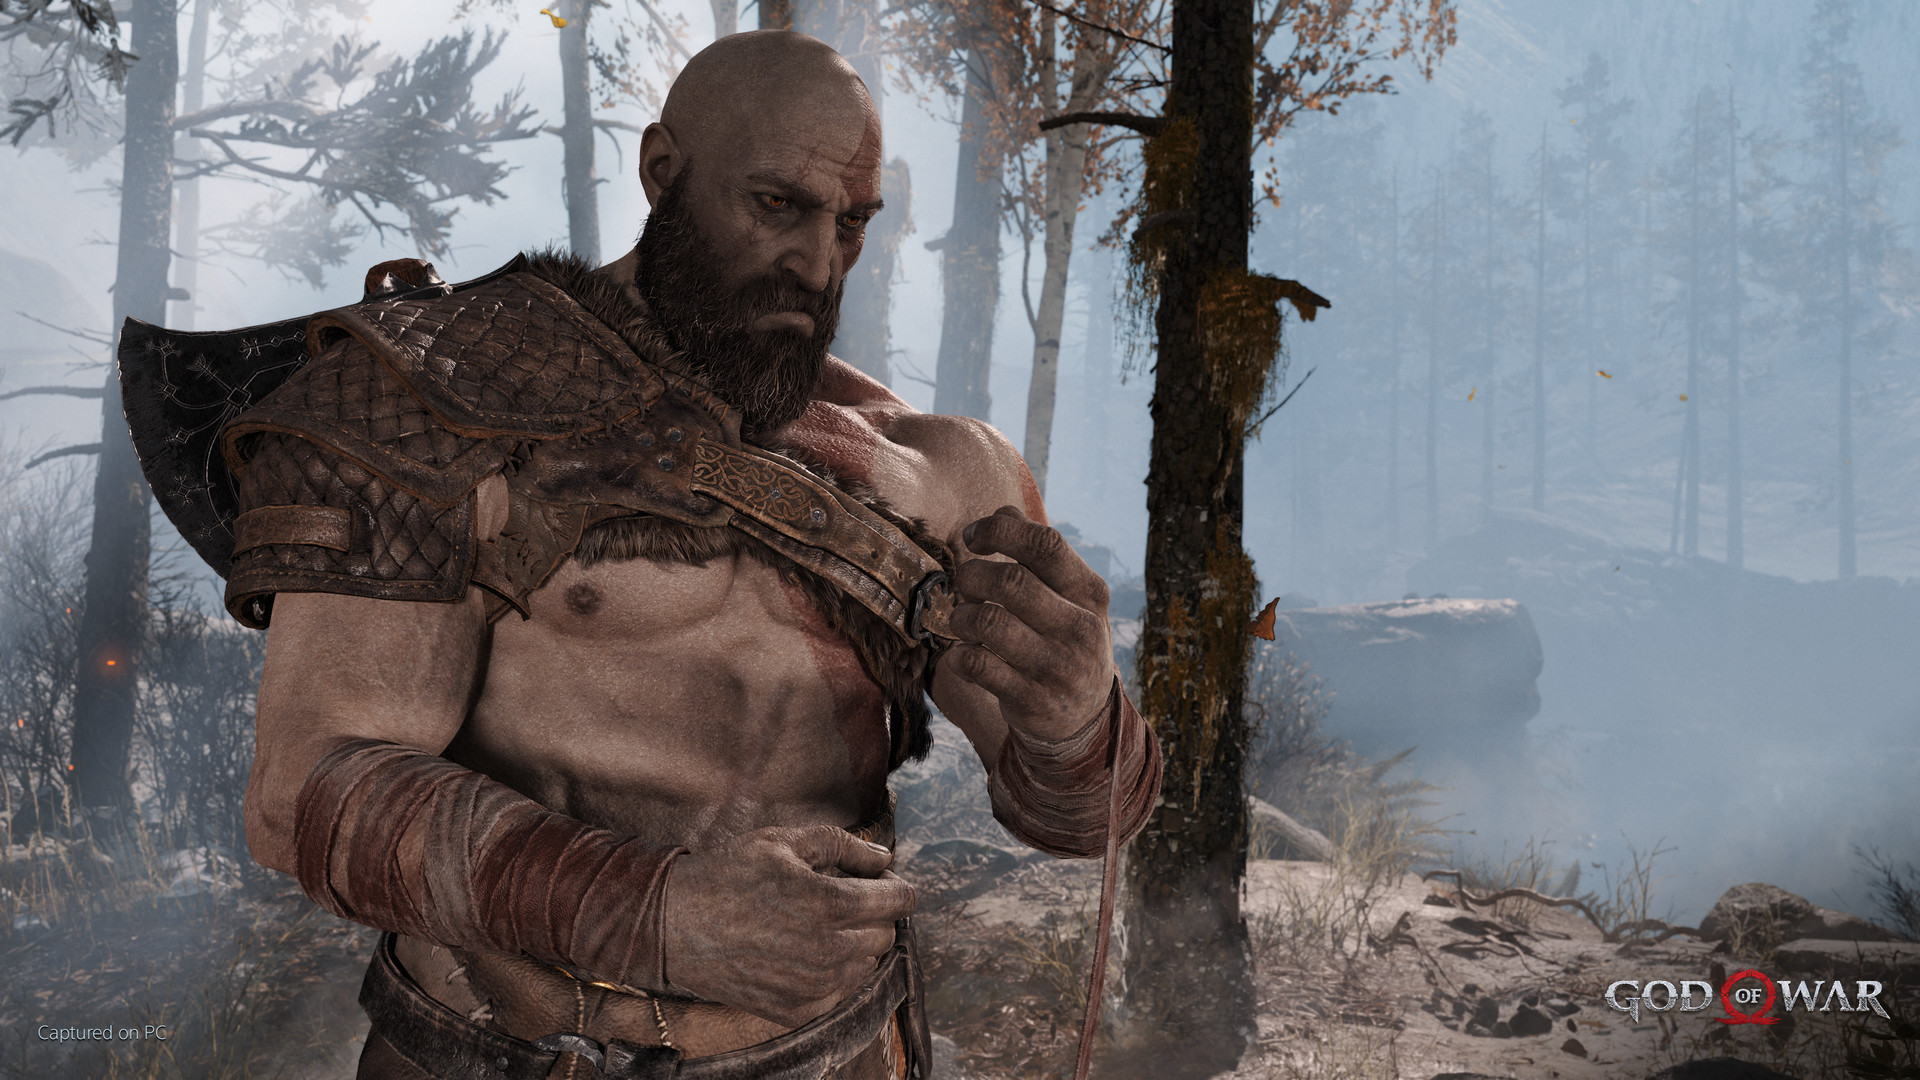 God of War may be the latest PlayStation classic to go PC